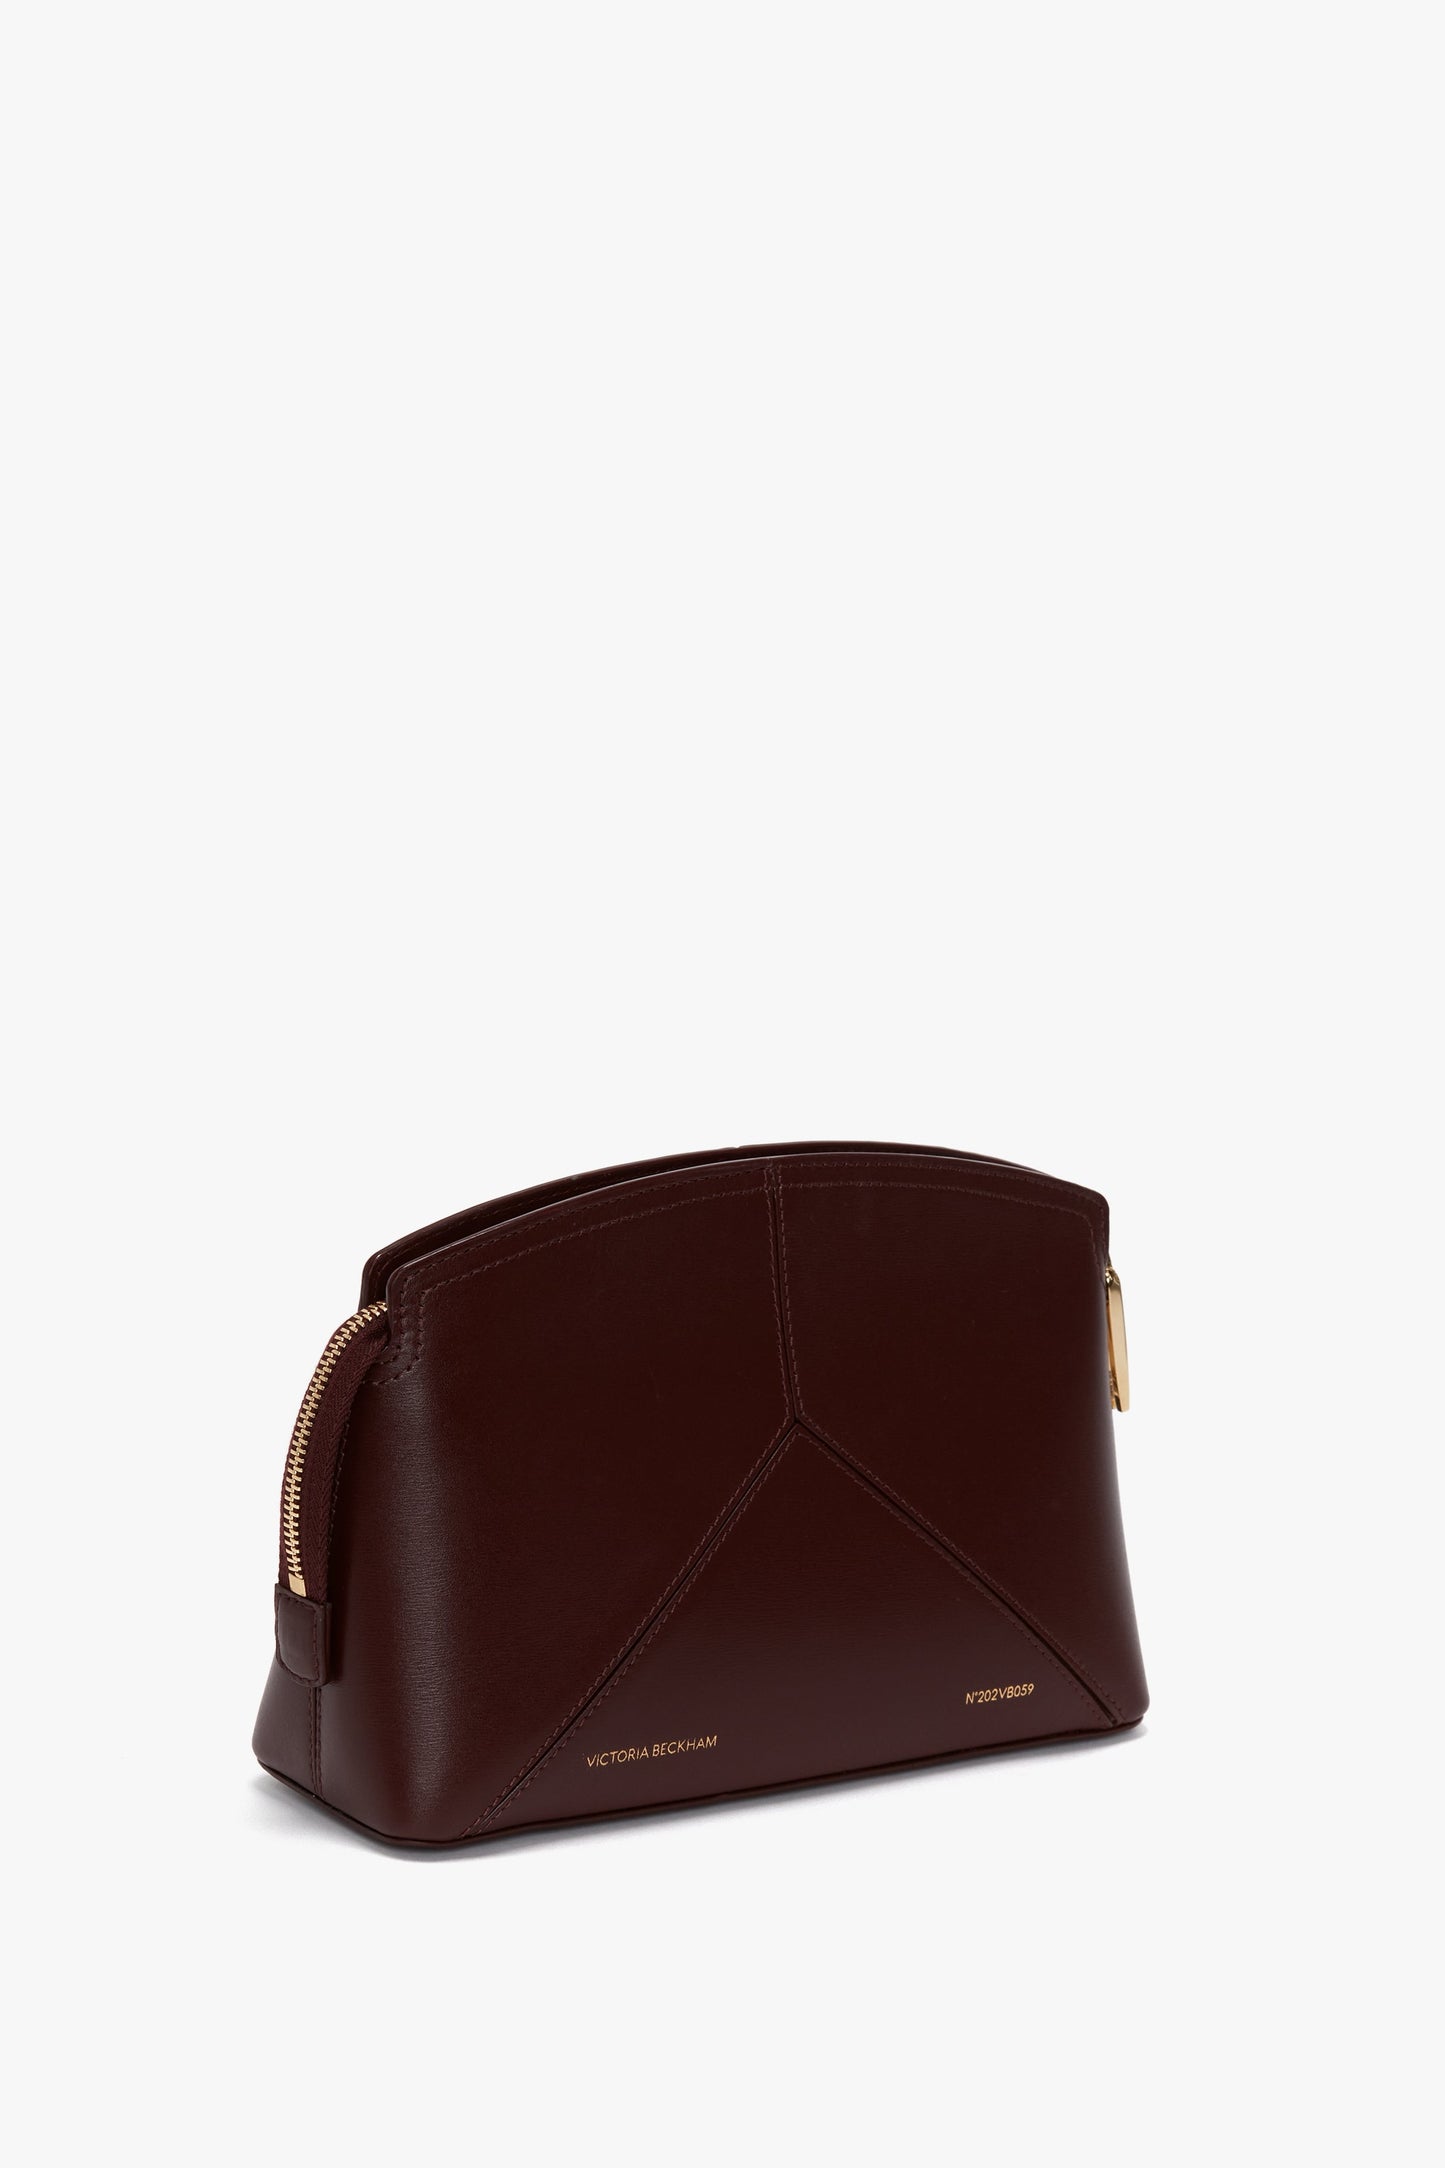 A dark brown, semi-curve shaped Victoria Crossbody Bag In Burgundy Leather, crafted from rich burgundy leather by Victoria Beckham, featuring gold-toned zippers and minimalistic branding embossed on the front.